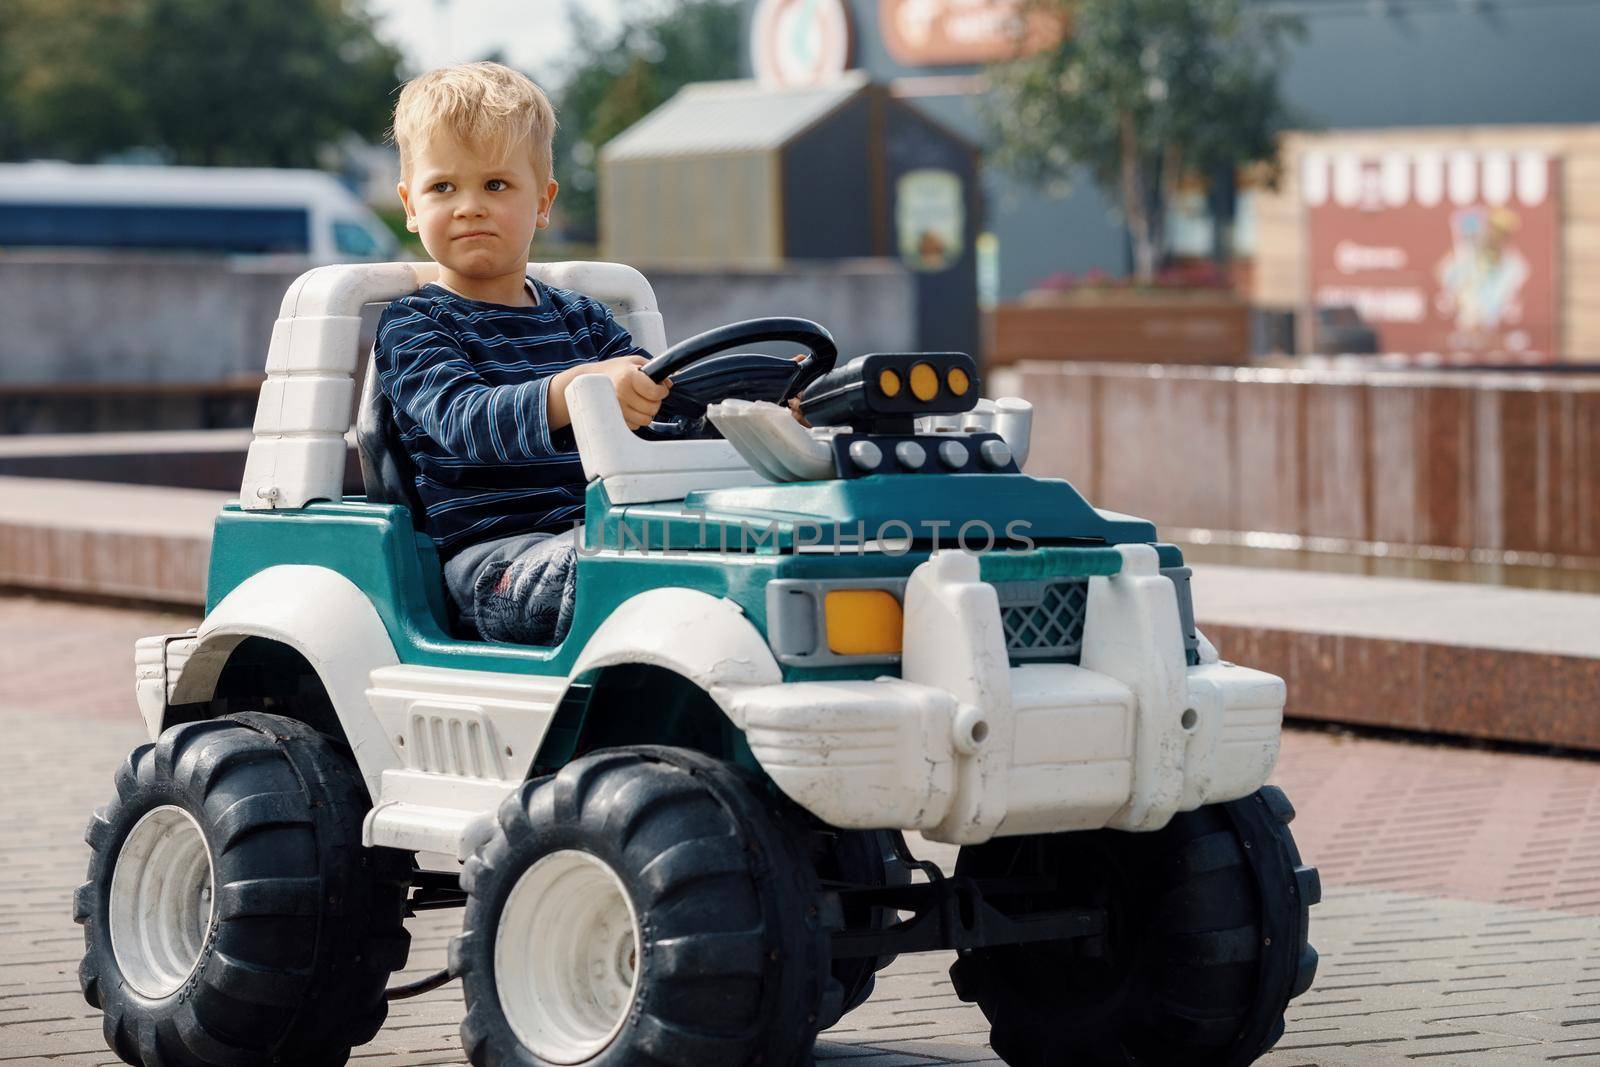 The happy blond boy is very focused, driving a big green toy SUV. by Lincikas